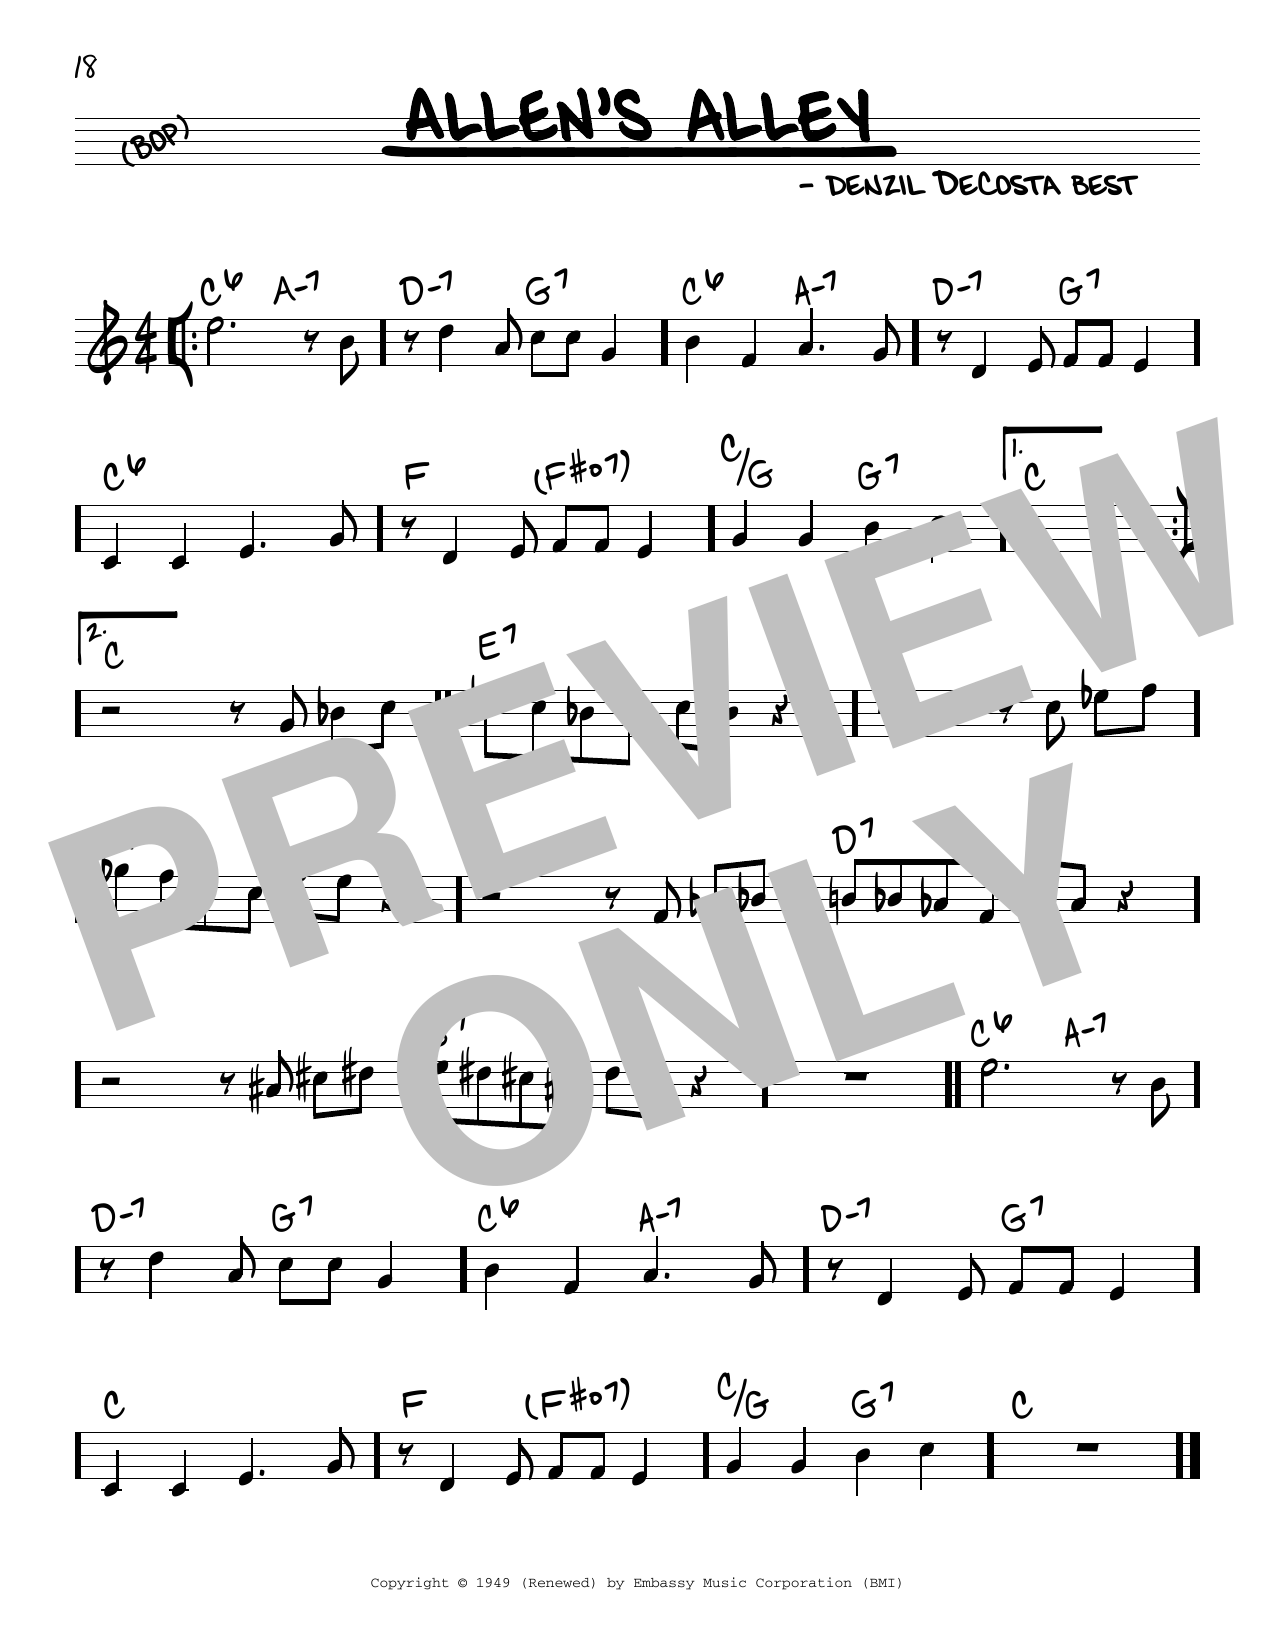 Download Denzil DeCosta Best Wee (Allen's Alley) sheet music and printable PDF score & Jazz music notes